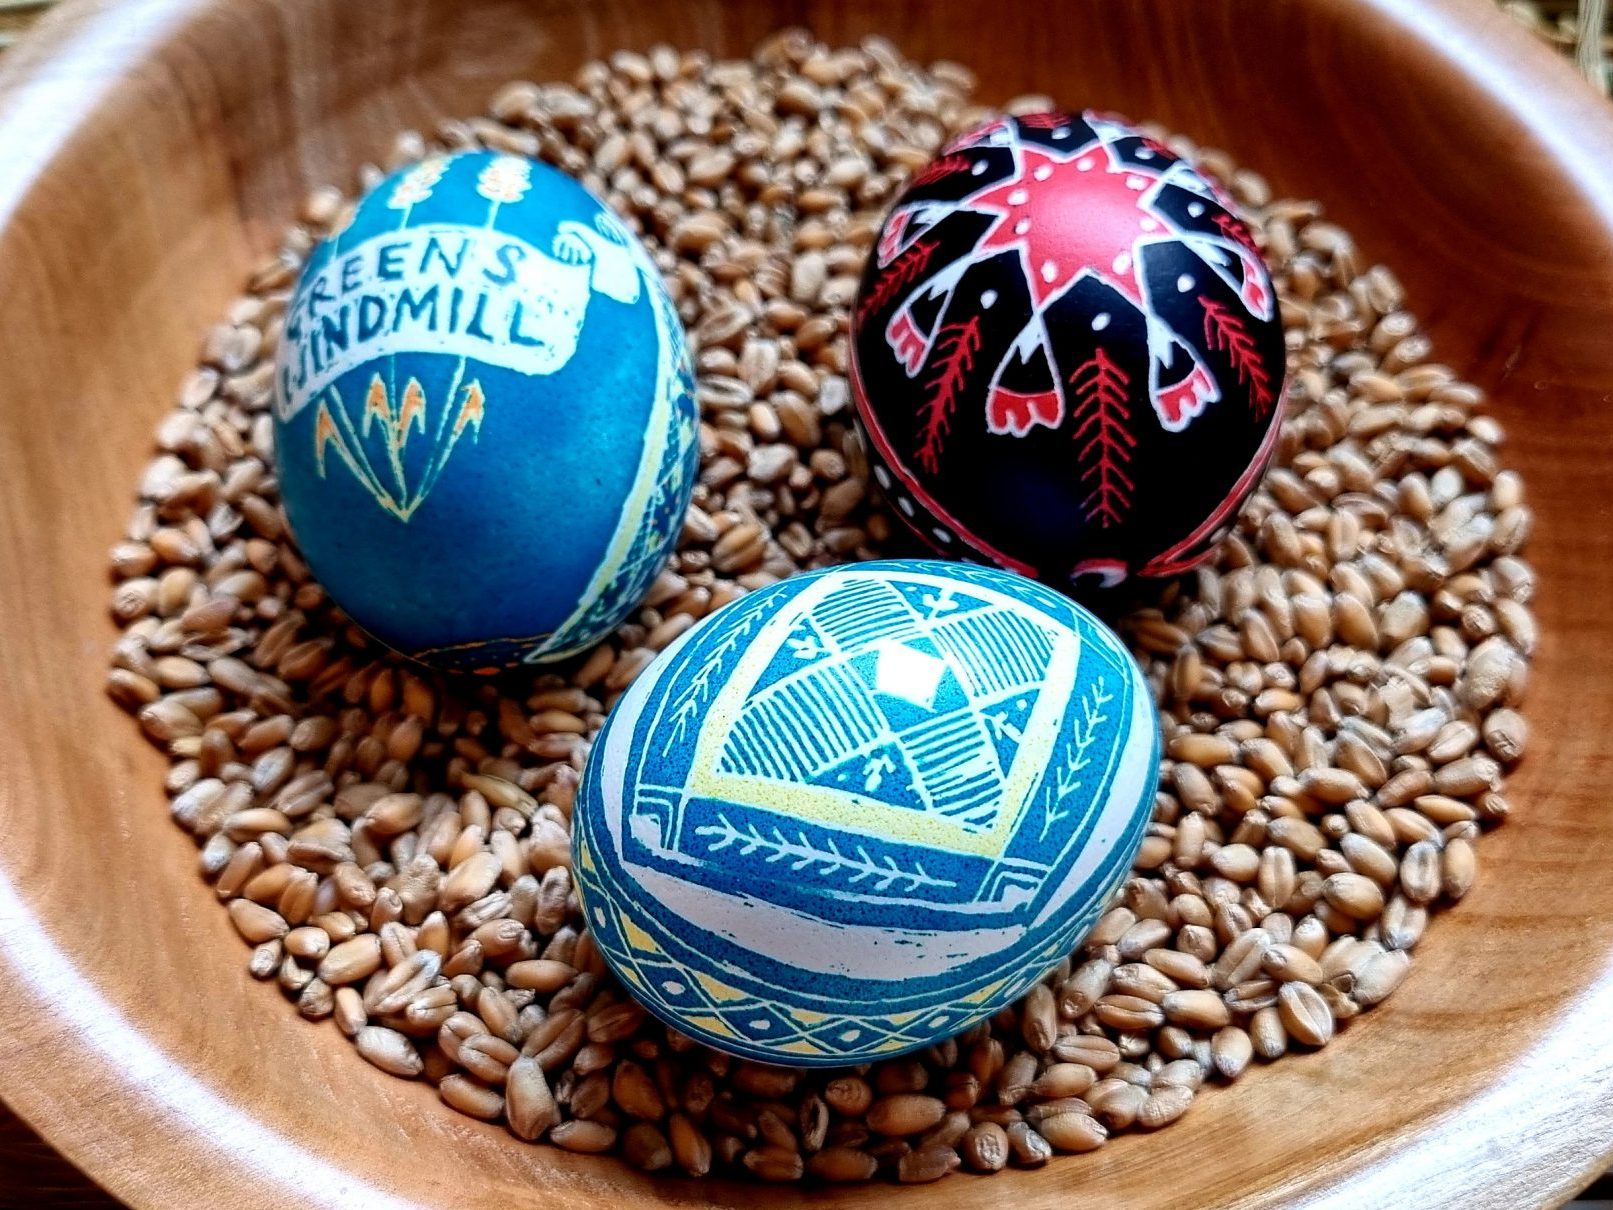 Three Pysanky Eggs in a Wooden Bowl